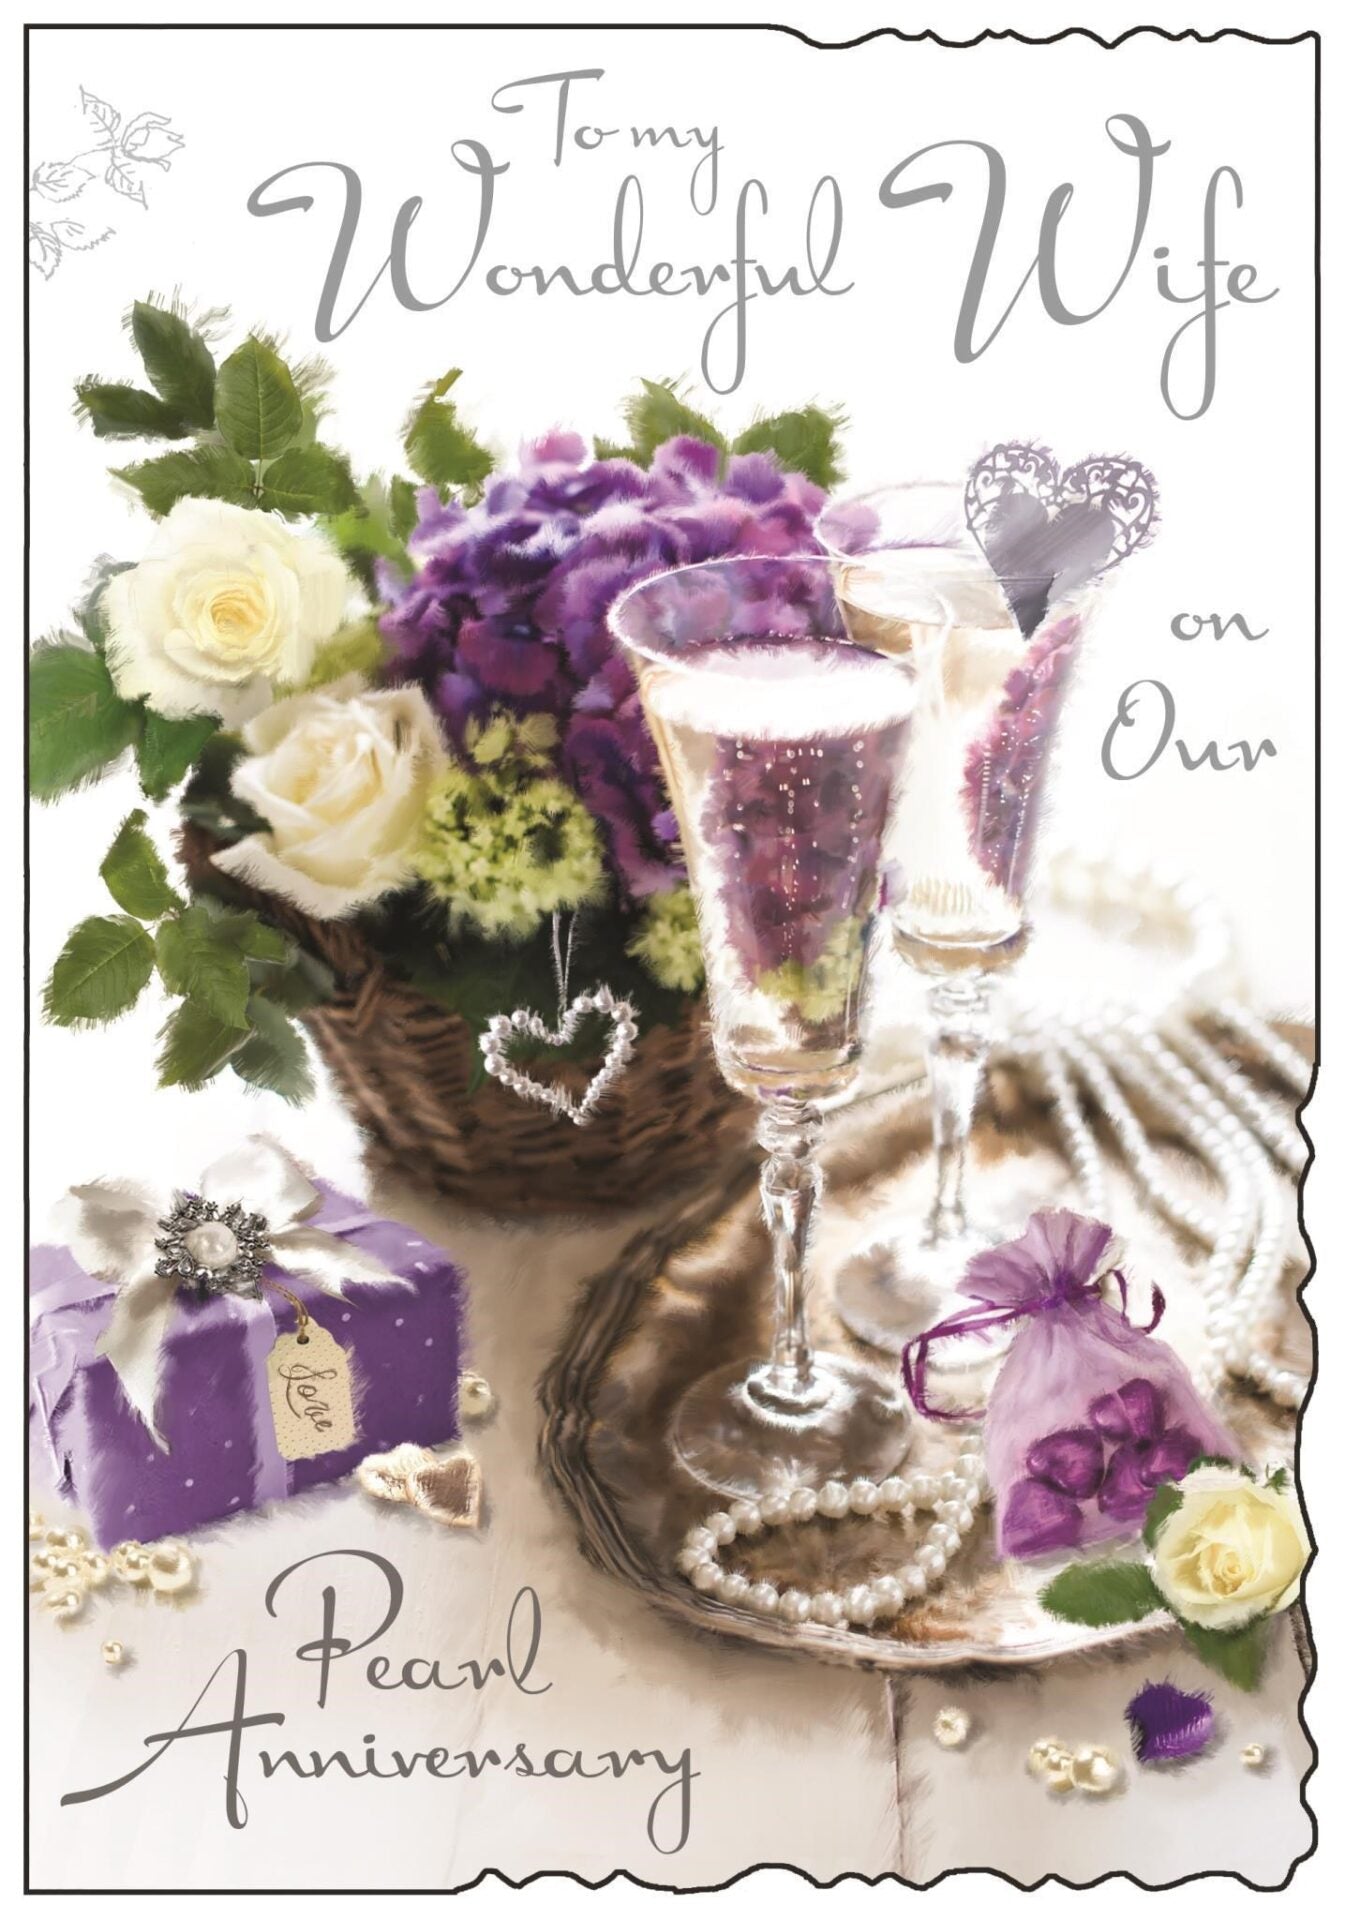 Wife 30th Wedding Anniversary Card - Pearls, Champagne, Flowers, And Gifts 